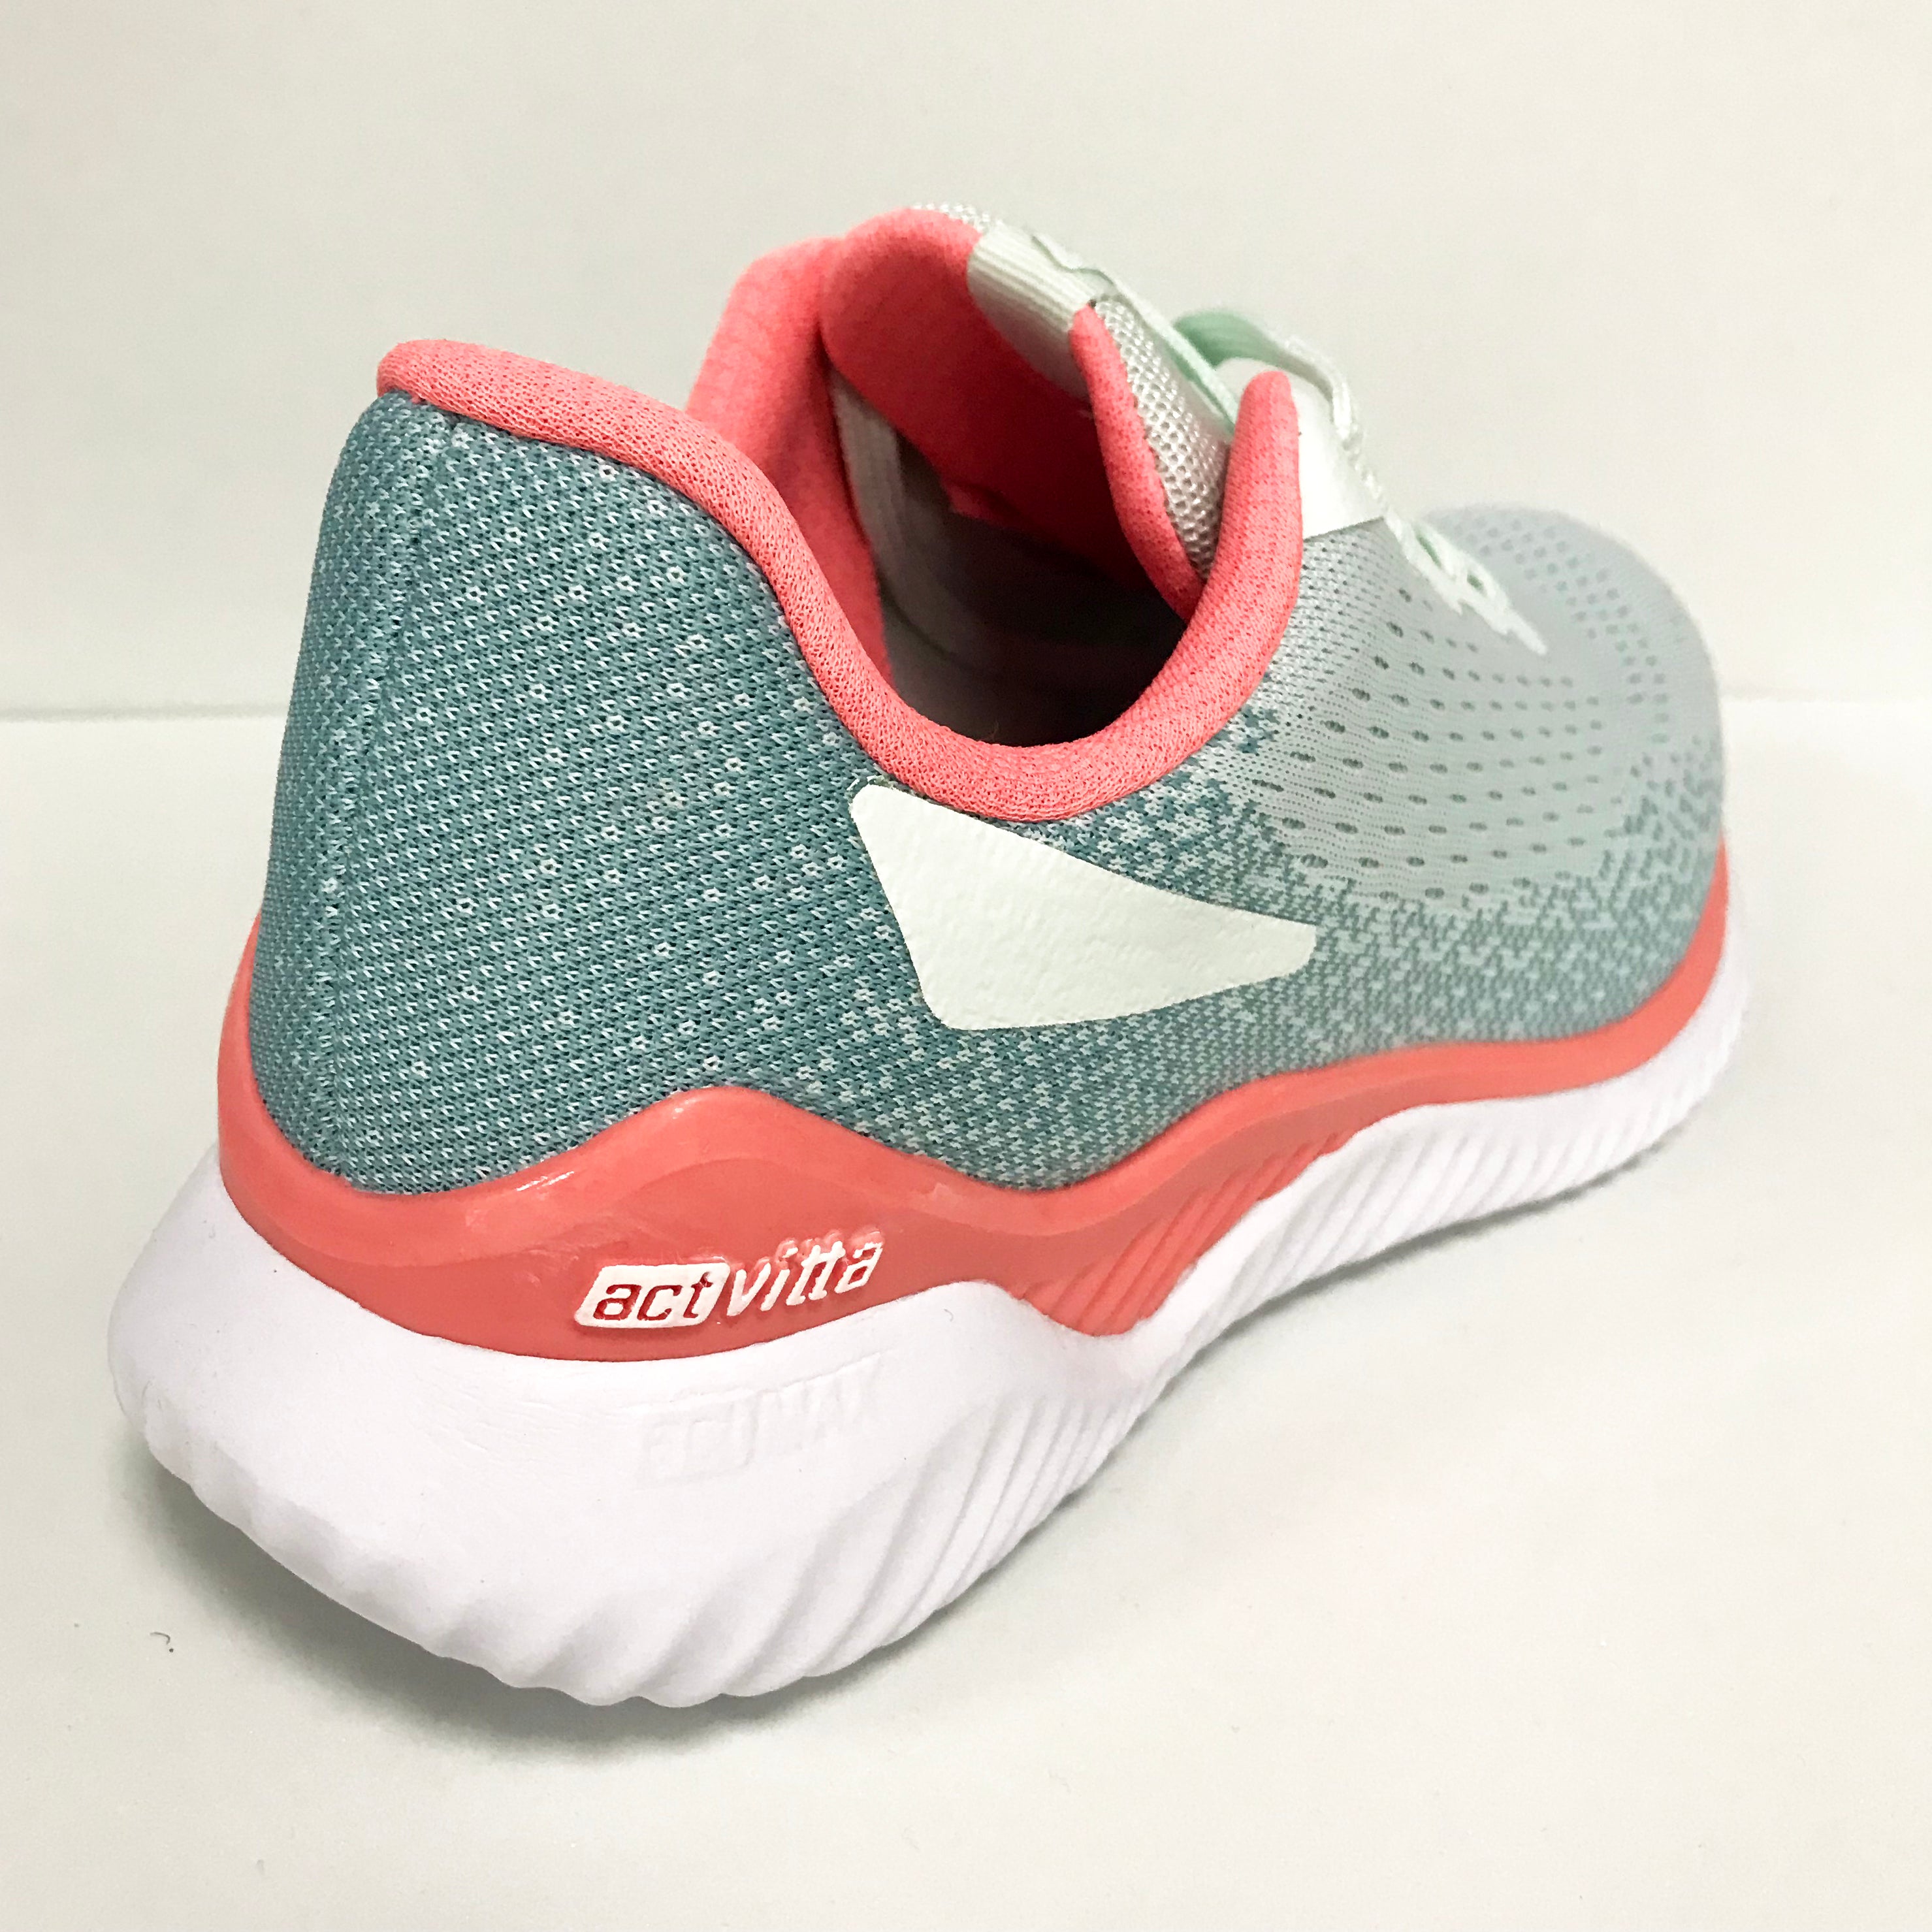 Actvitta 4802-104 Lace up Sneaker in Multi Mint